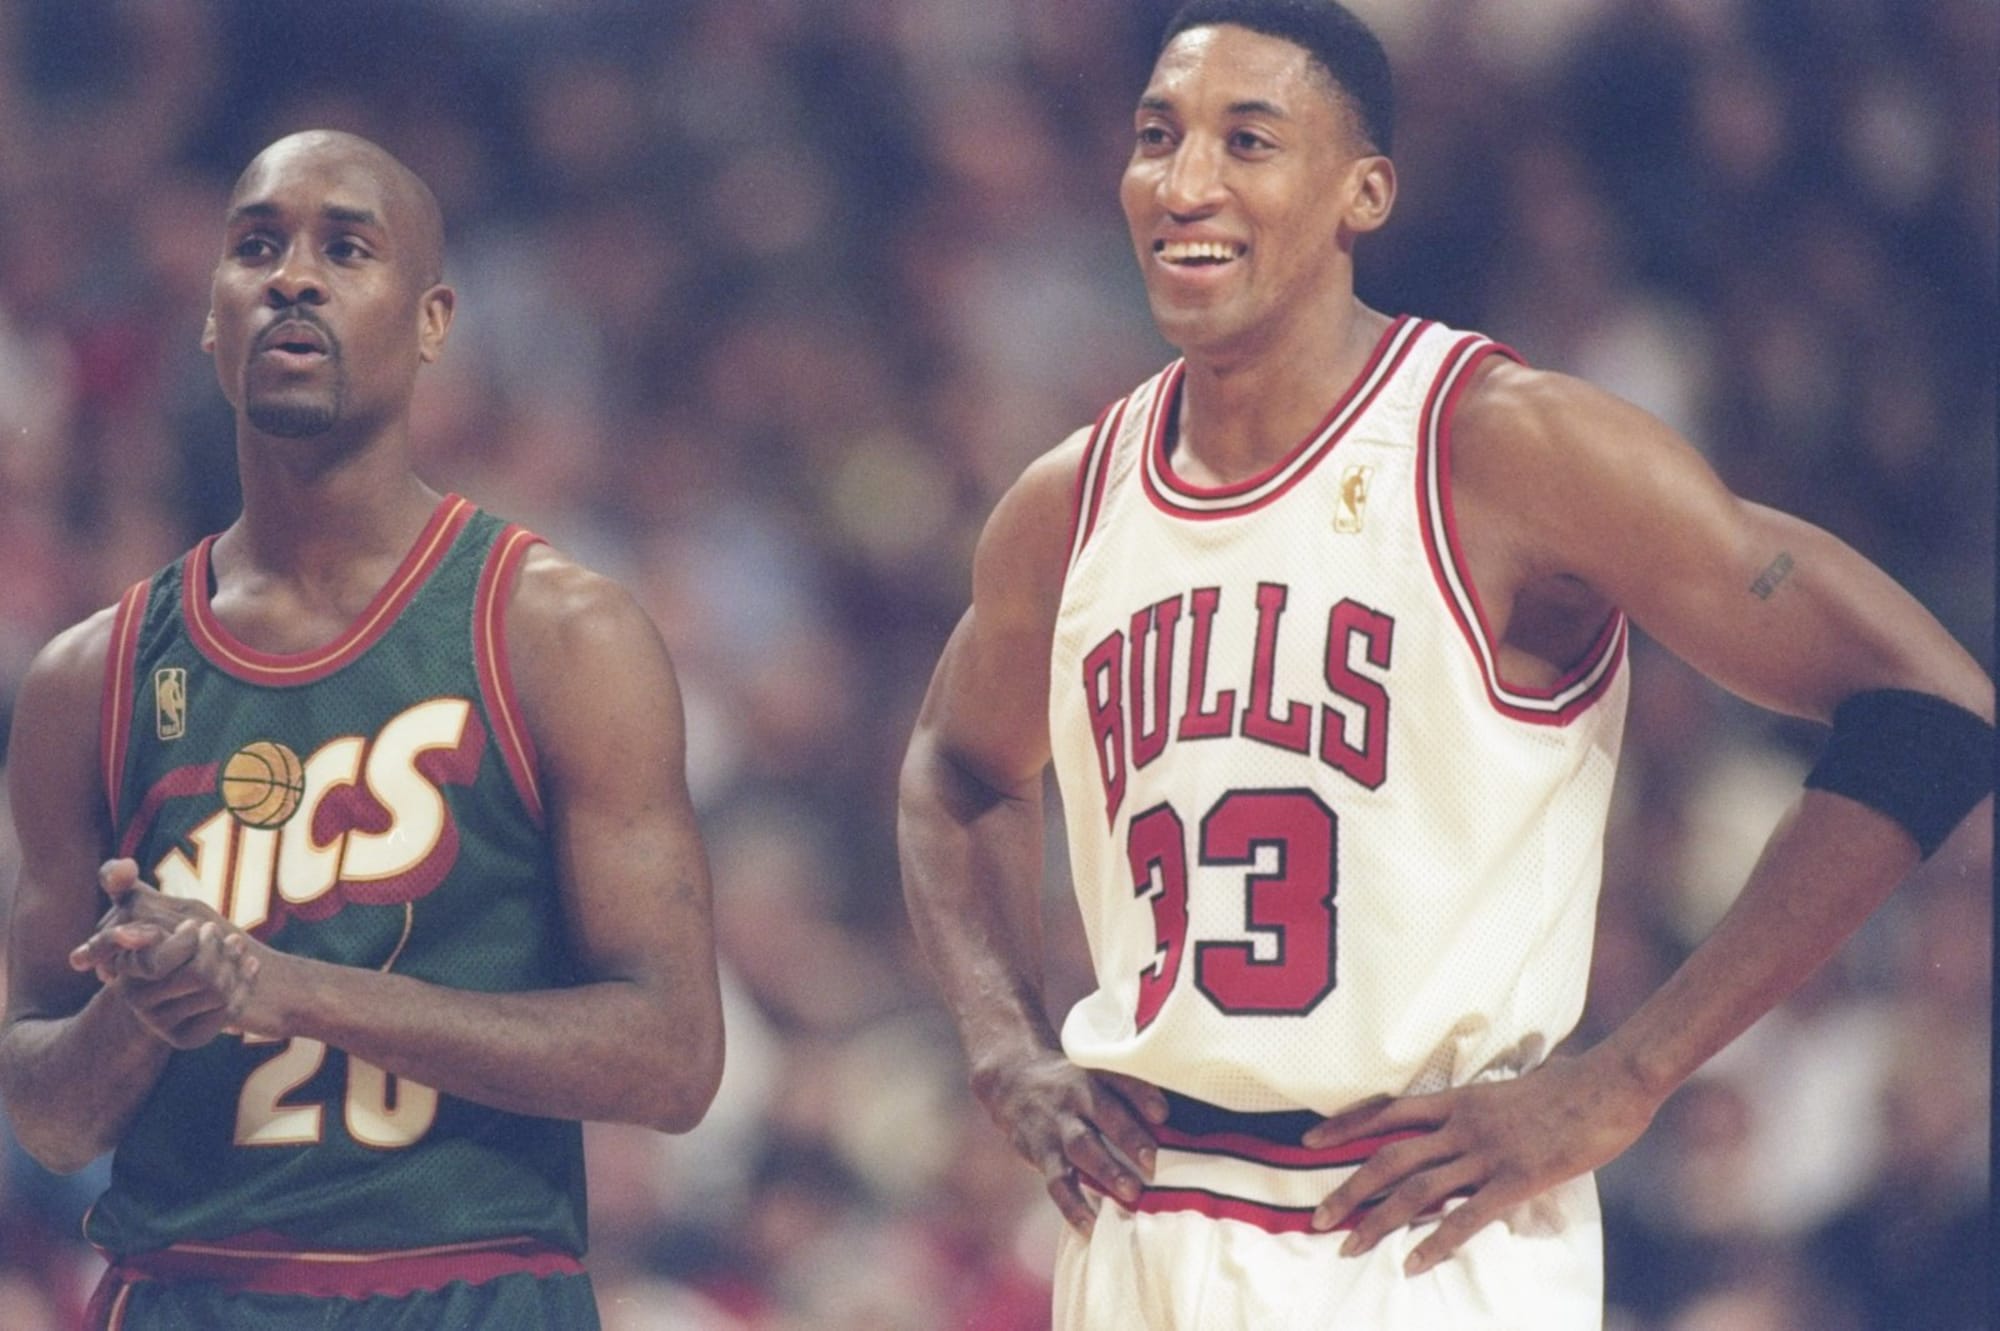 Brooklyn Nets: What if the Nets had drafted Scottie Pippen in 1987?